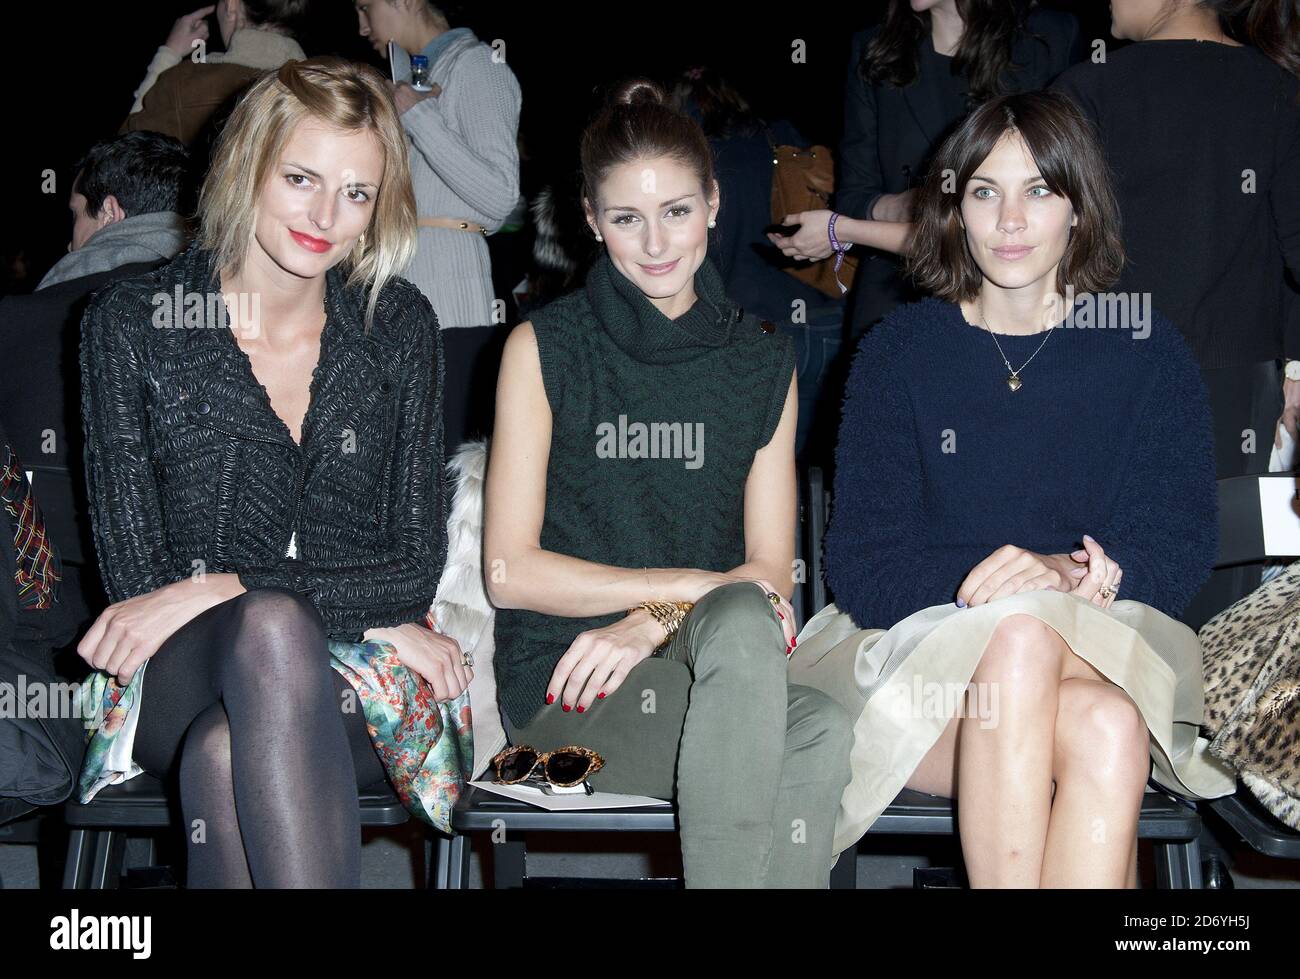 (l-r) Jacquetta Wheeler, Olivia Palermo and Alexa Chung attending the Erdem fashion show, held at the University of Westminster as part of London Fashion Week. Stock Photo